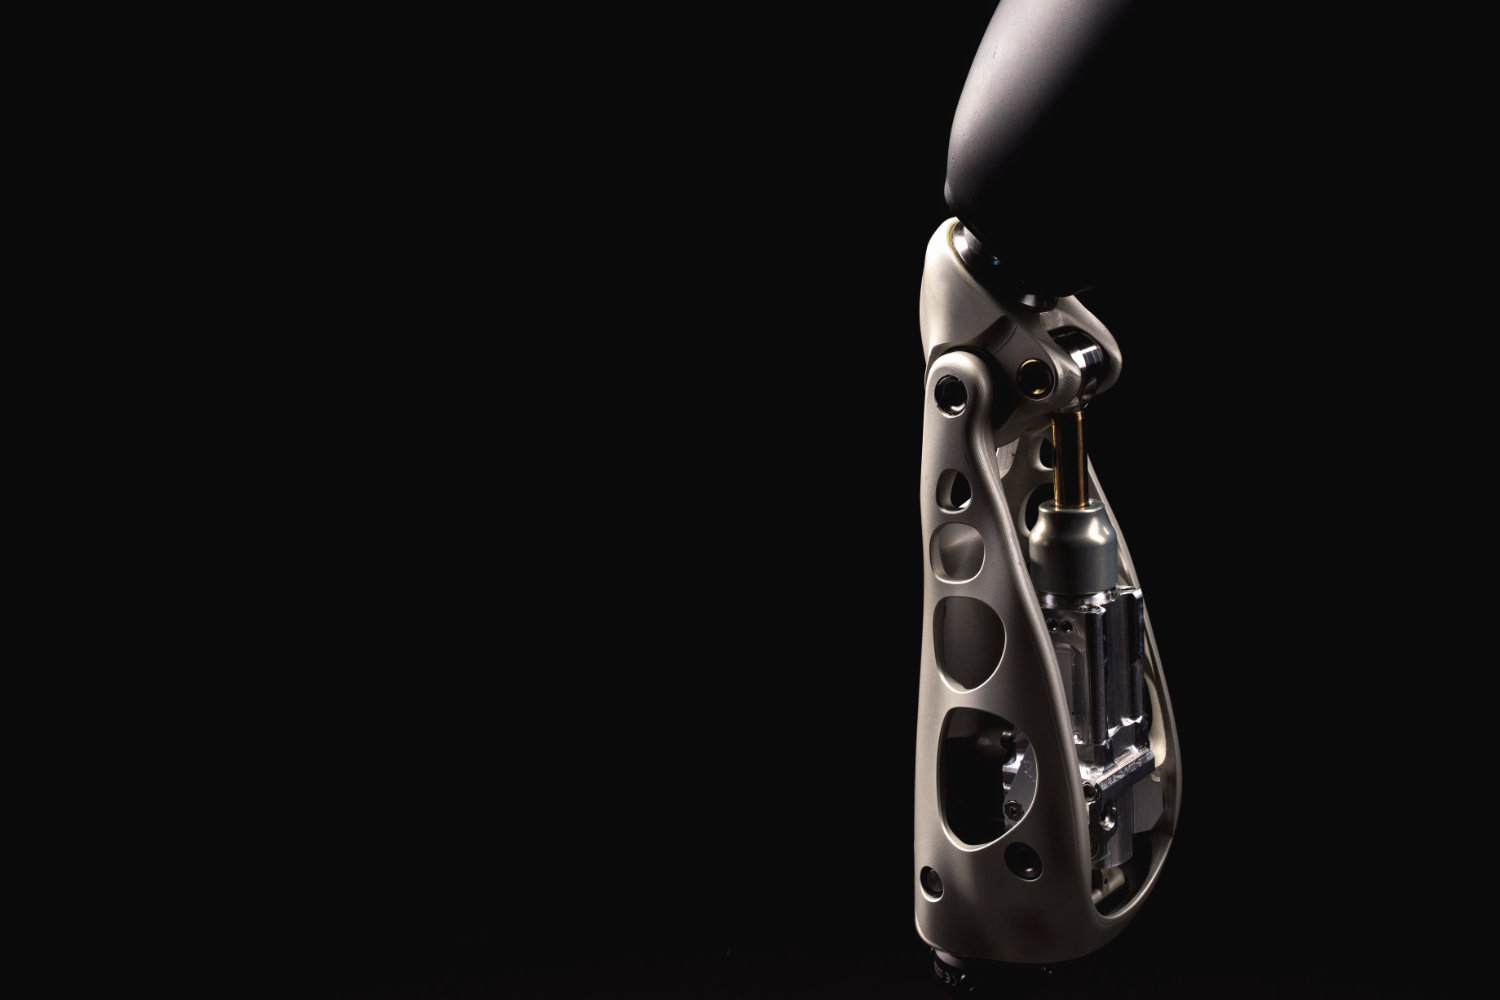 Very Good Knee By Orthomobility Prosthetic Knee Joints With Fluidic Processor Technology